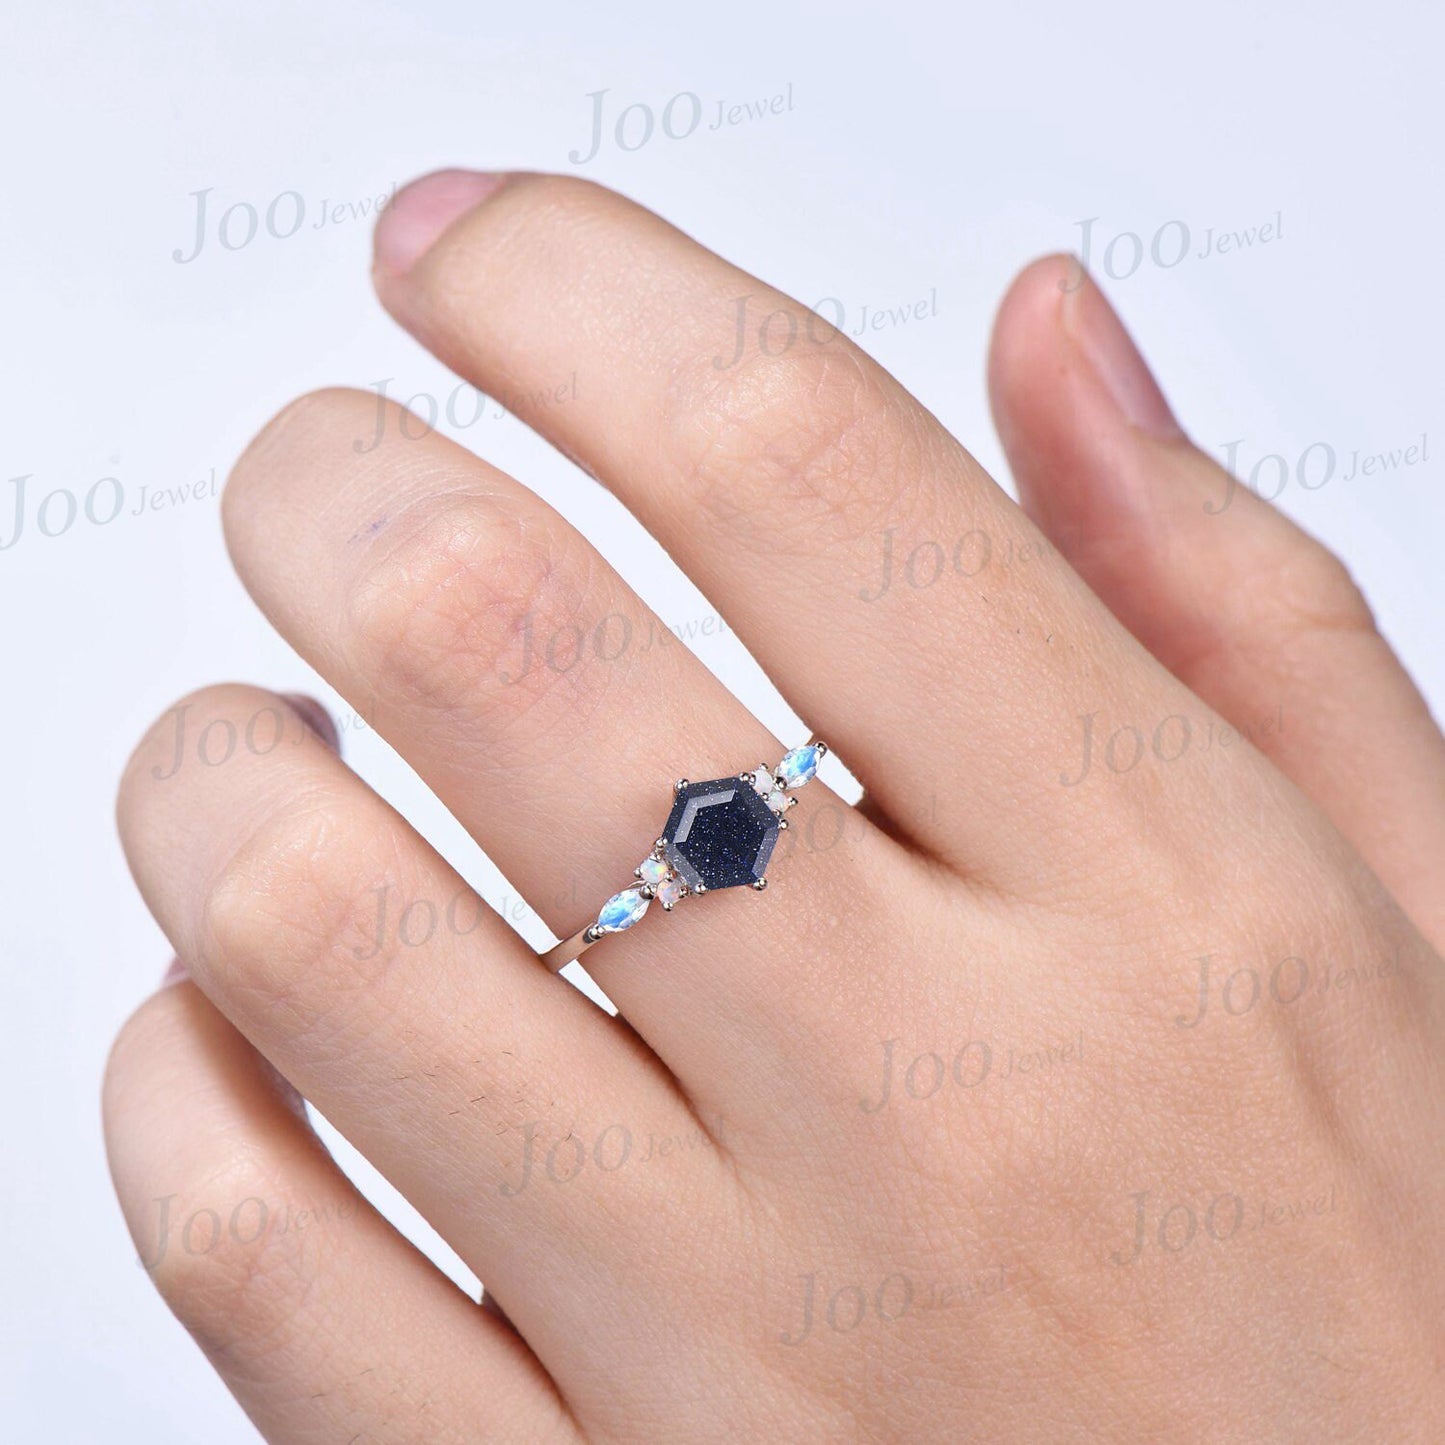 1ct Hexagon Cut Galaxy Starry Sky Blue Goldstone Engagement Ring 10K/14K/18K White Gold Moonstone Opal Ring Unique Anniversary/Wedding Gift